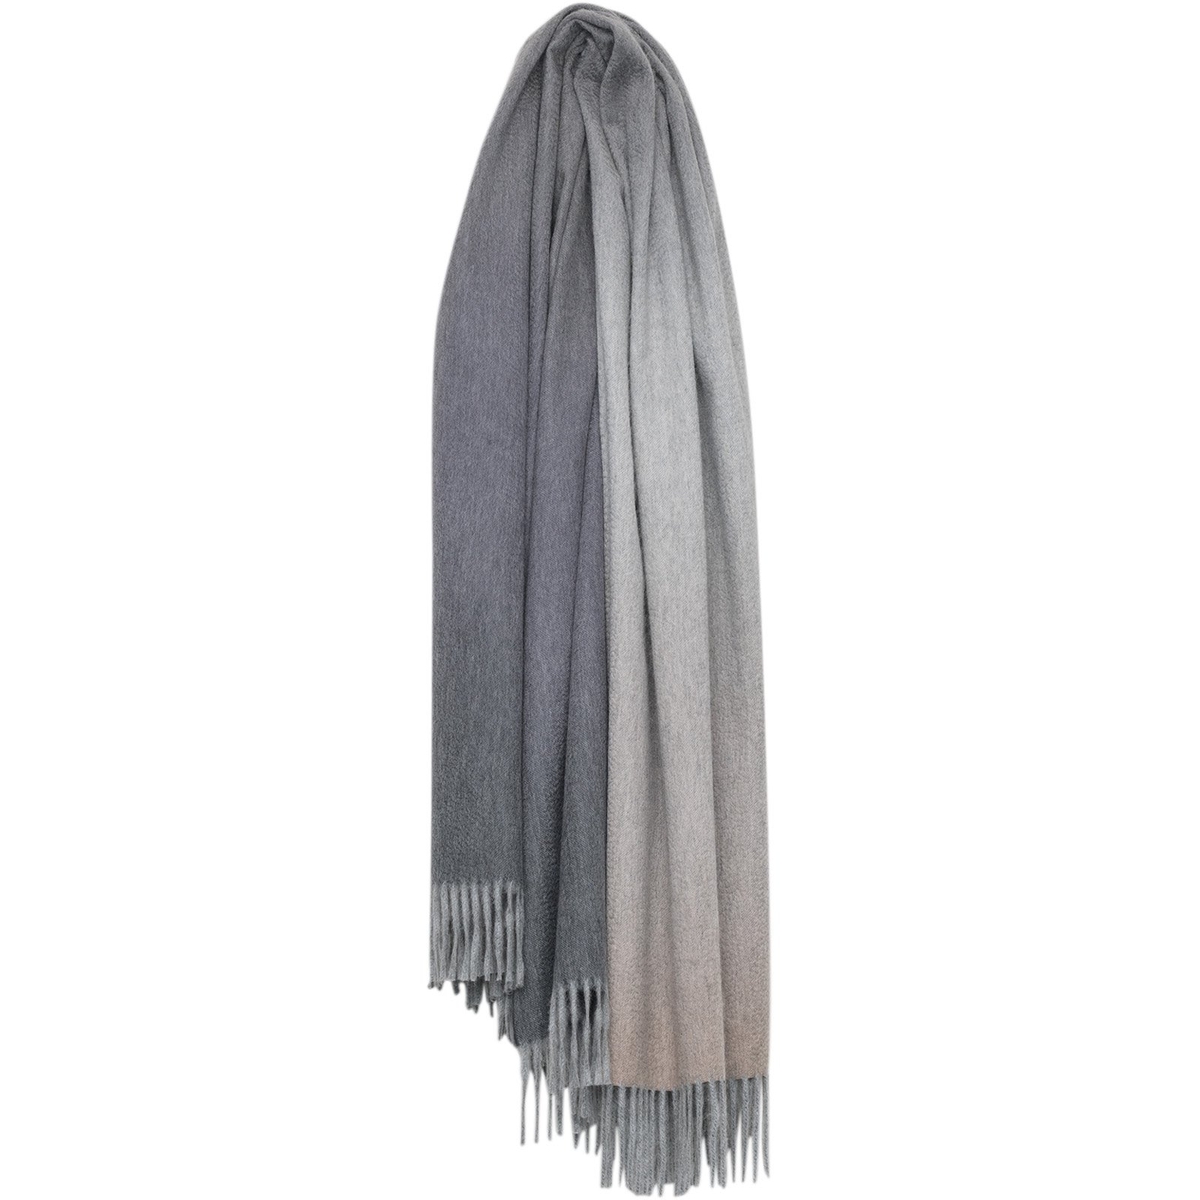 Nuance Ombre Cashmere Throw, Marble Midnight